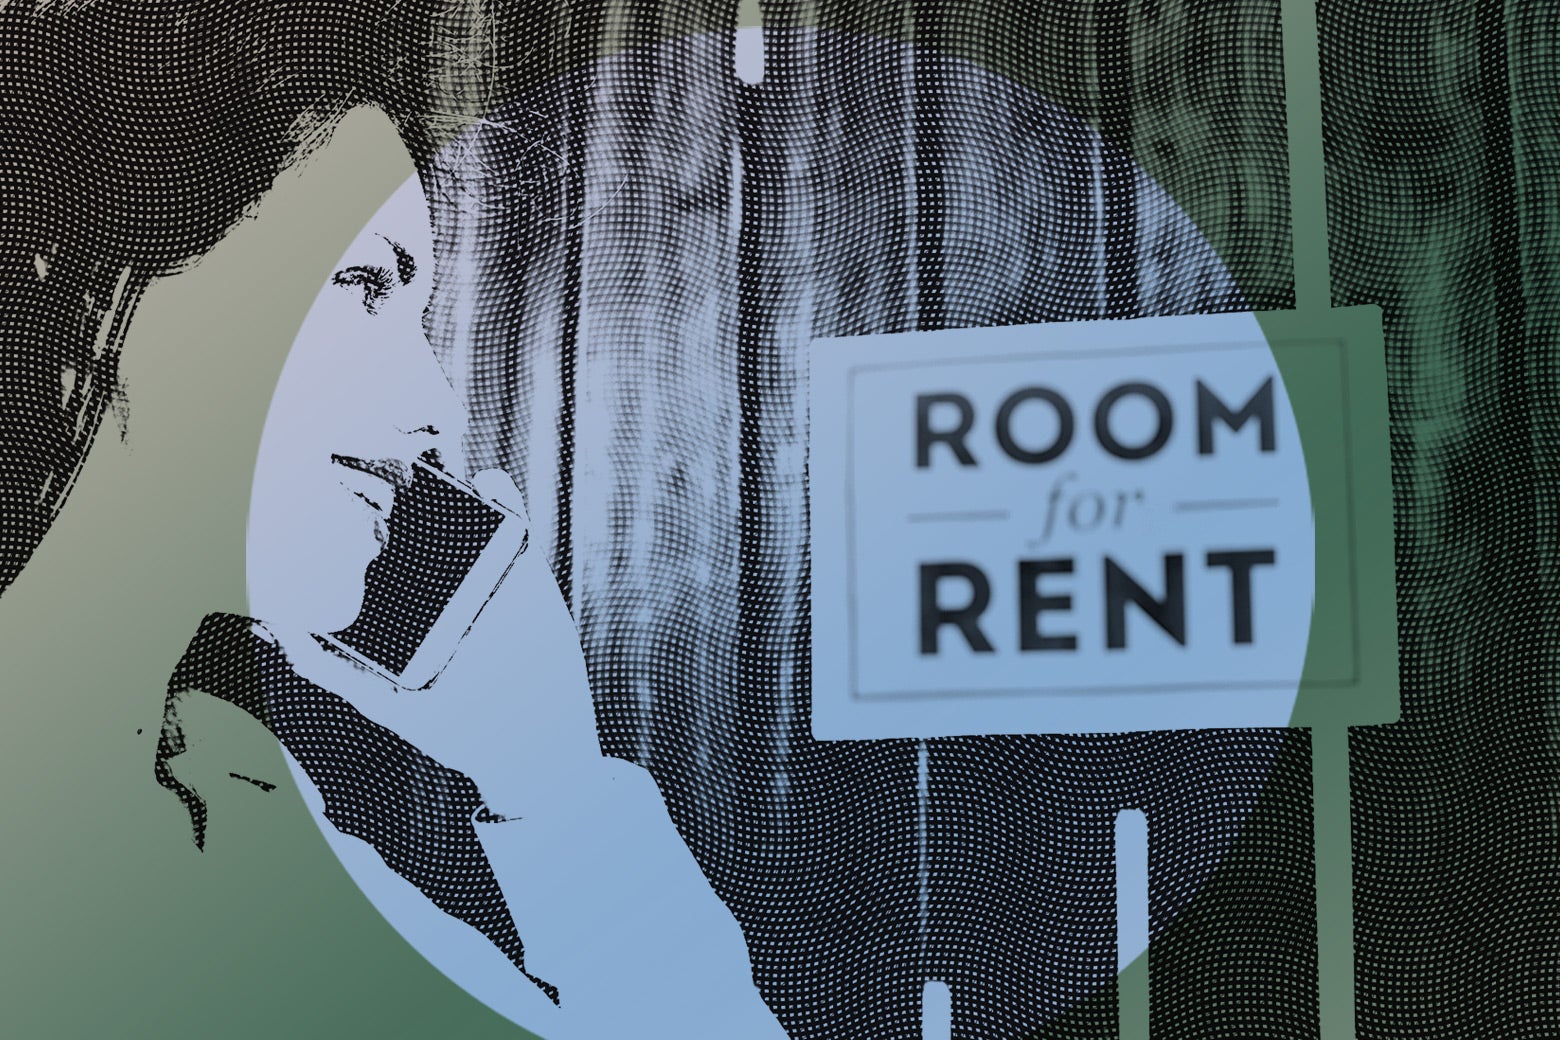 Woman on the phone next to a room for rent sign.